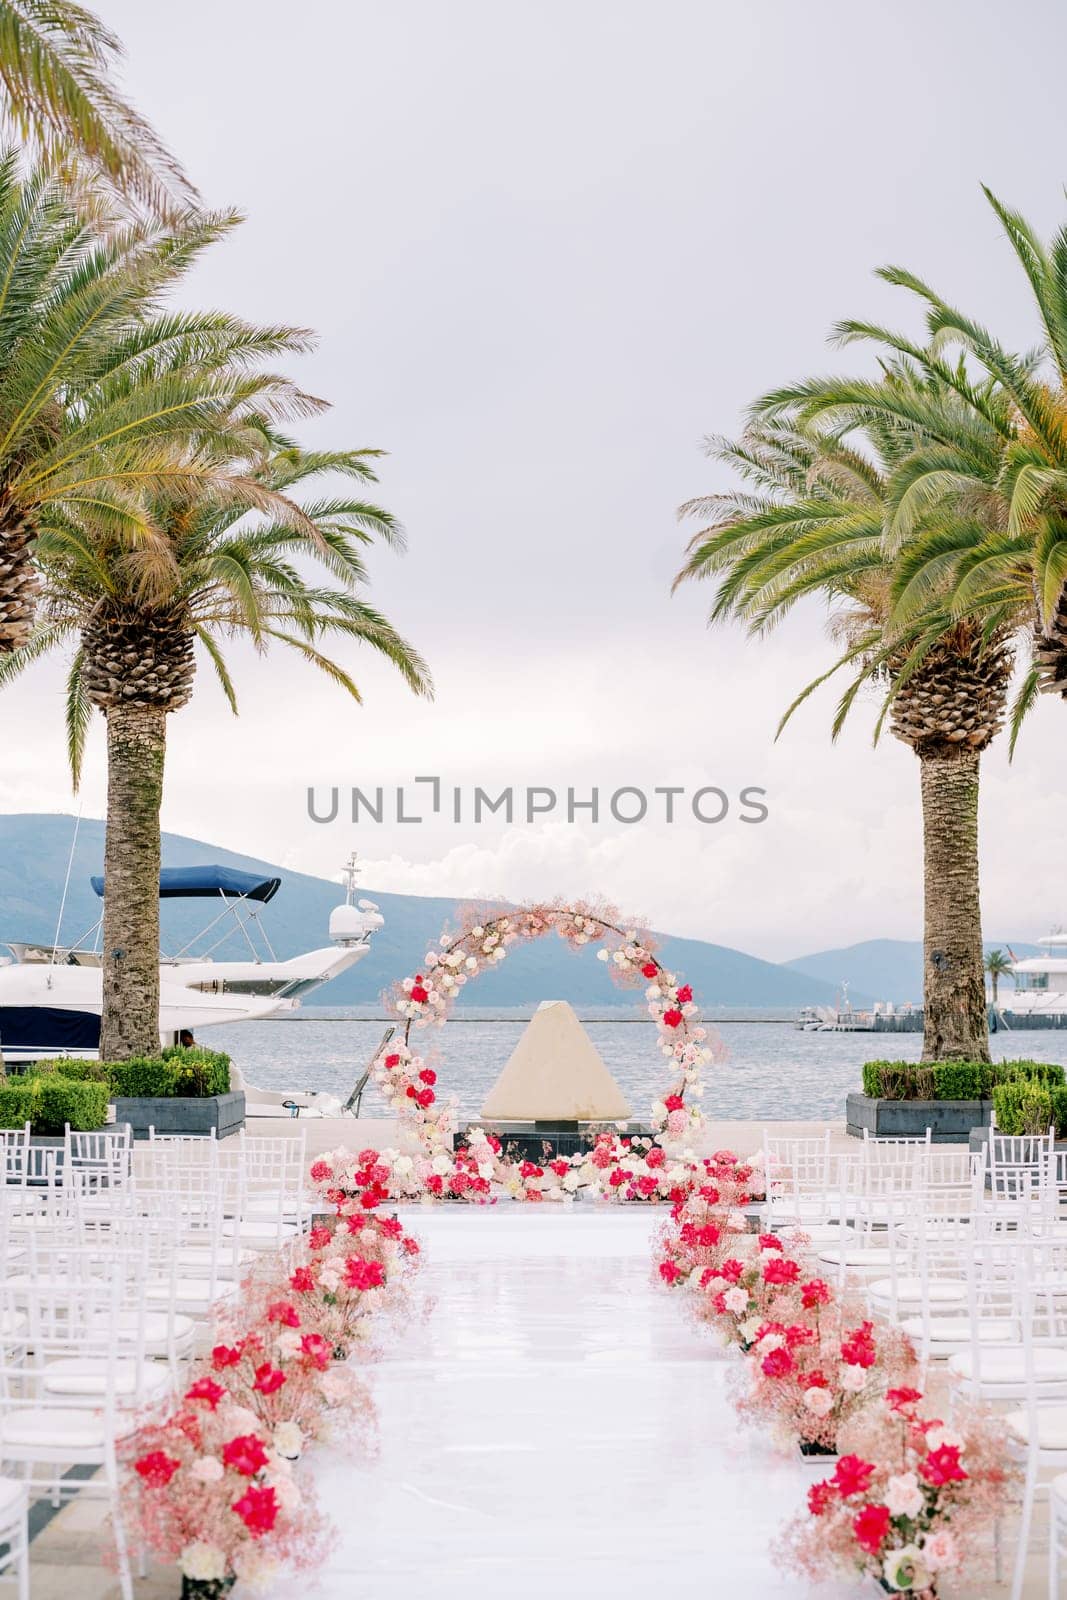 Rows of chairs line a white path decorated with red flowers in front of a round wedding arch on the pier by Nadtochiy